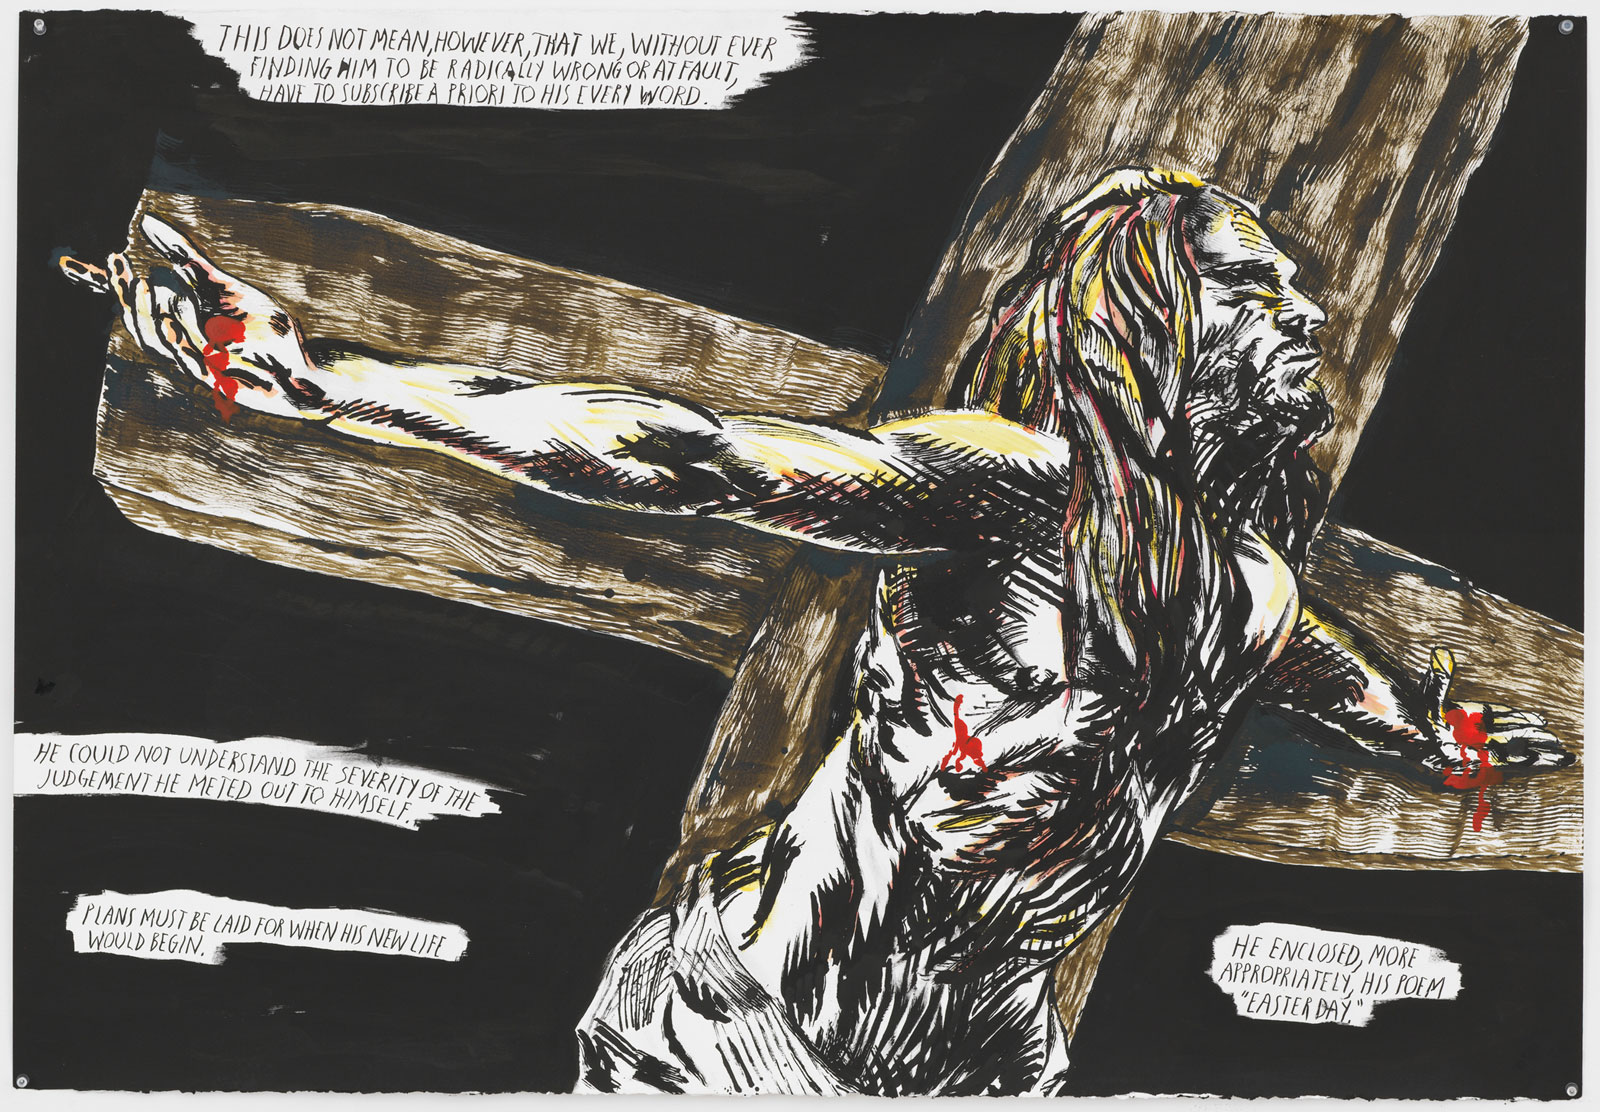 Pettibon's World | by Robert Storr | NYR Daily | The New York Review of Books1600 x 1112